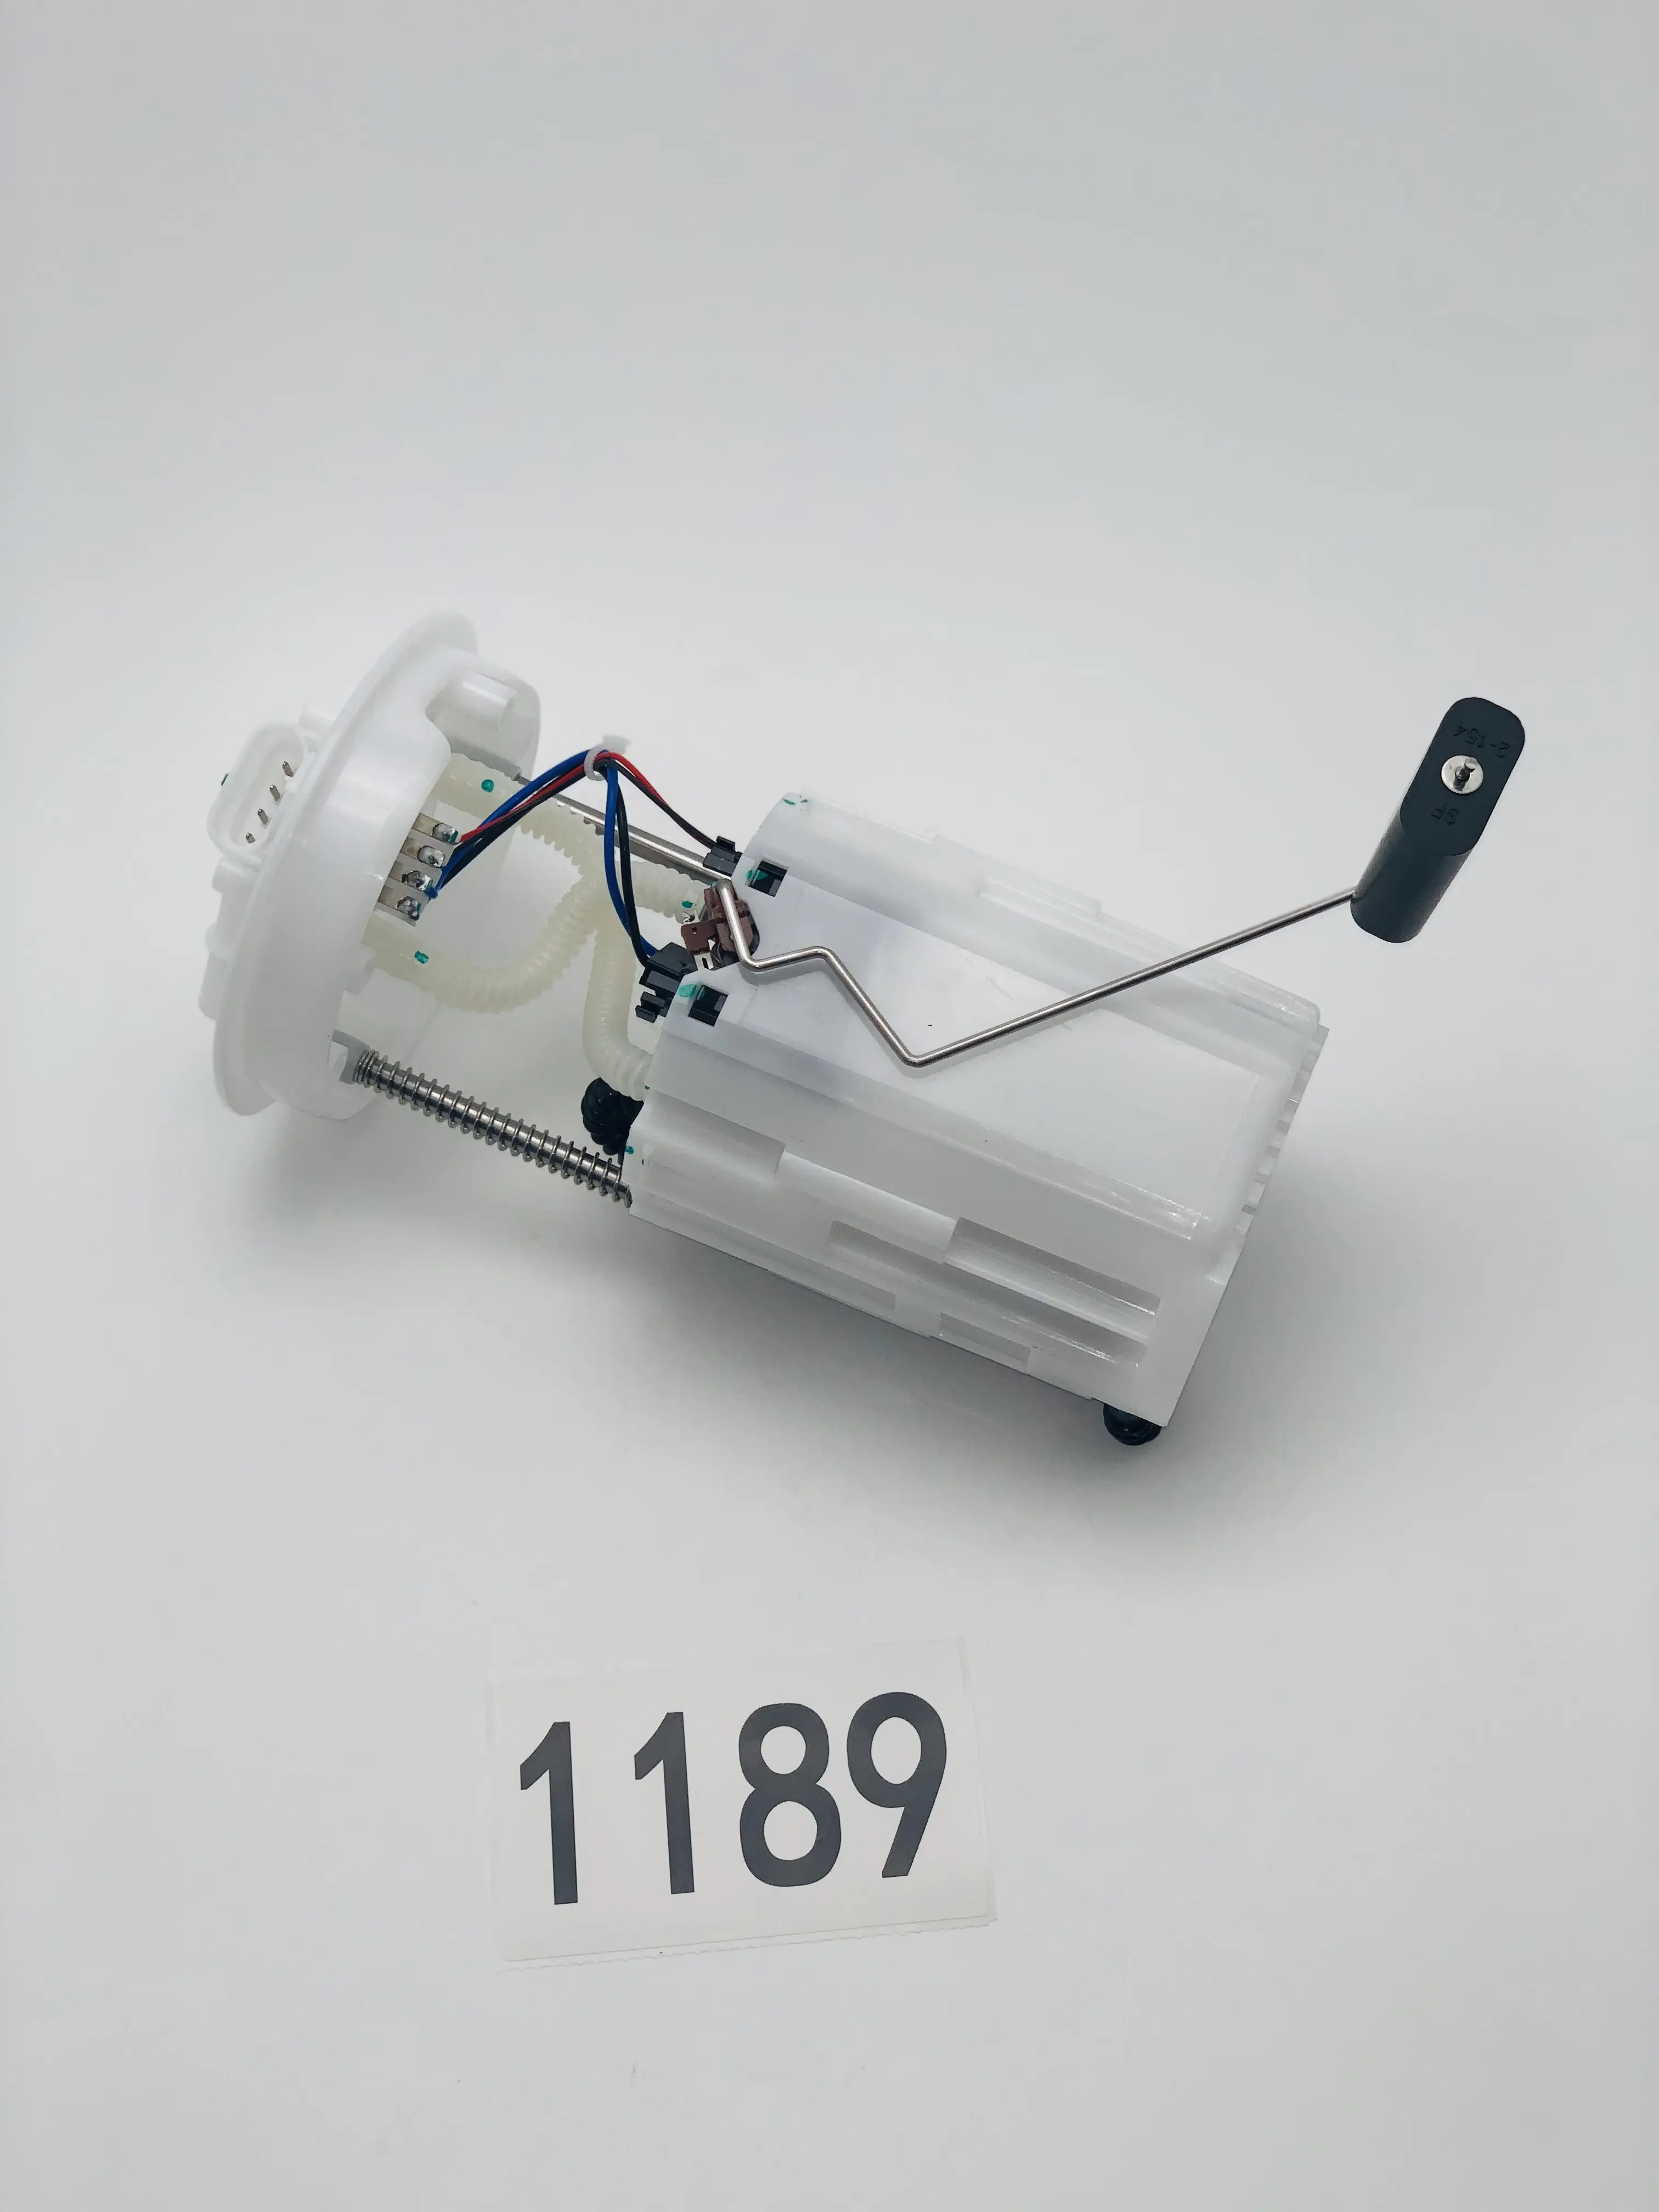 Geely Royal New ec7 KS - a1189 High Quality FUEL PUMP Assembly